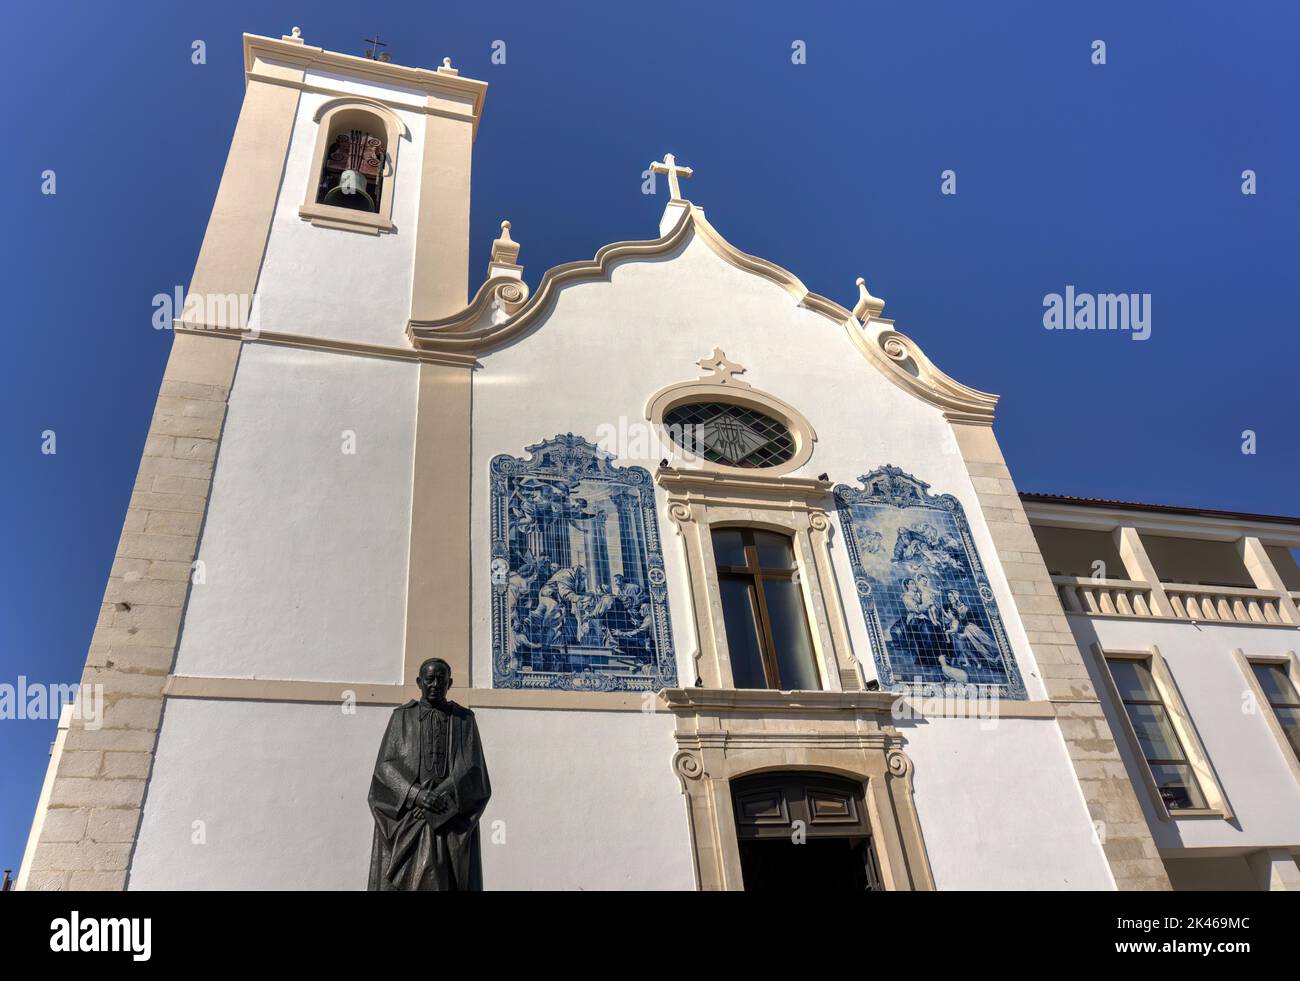 Aveiro, Portugal - August 14, 2022: Exterior of top of Vera Cruz church showing bell tower and ceramic tiles on wall Stock Photo